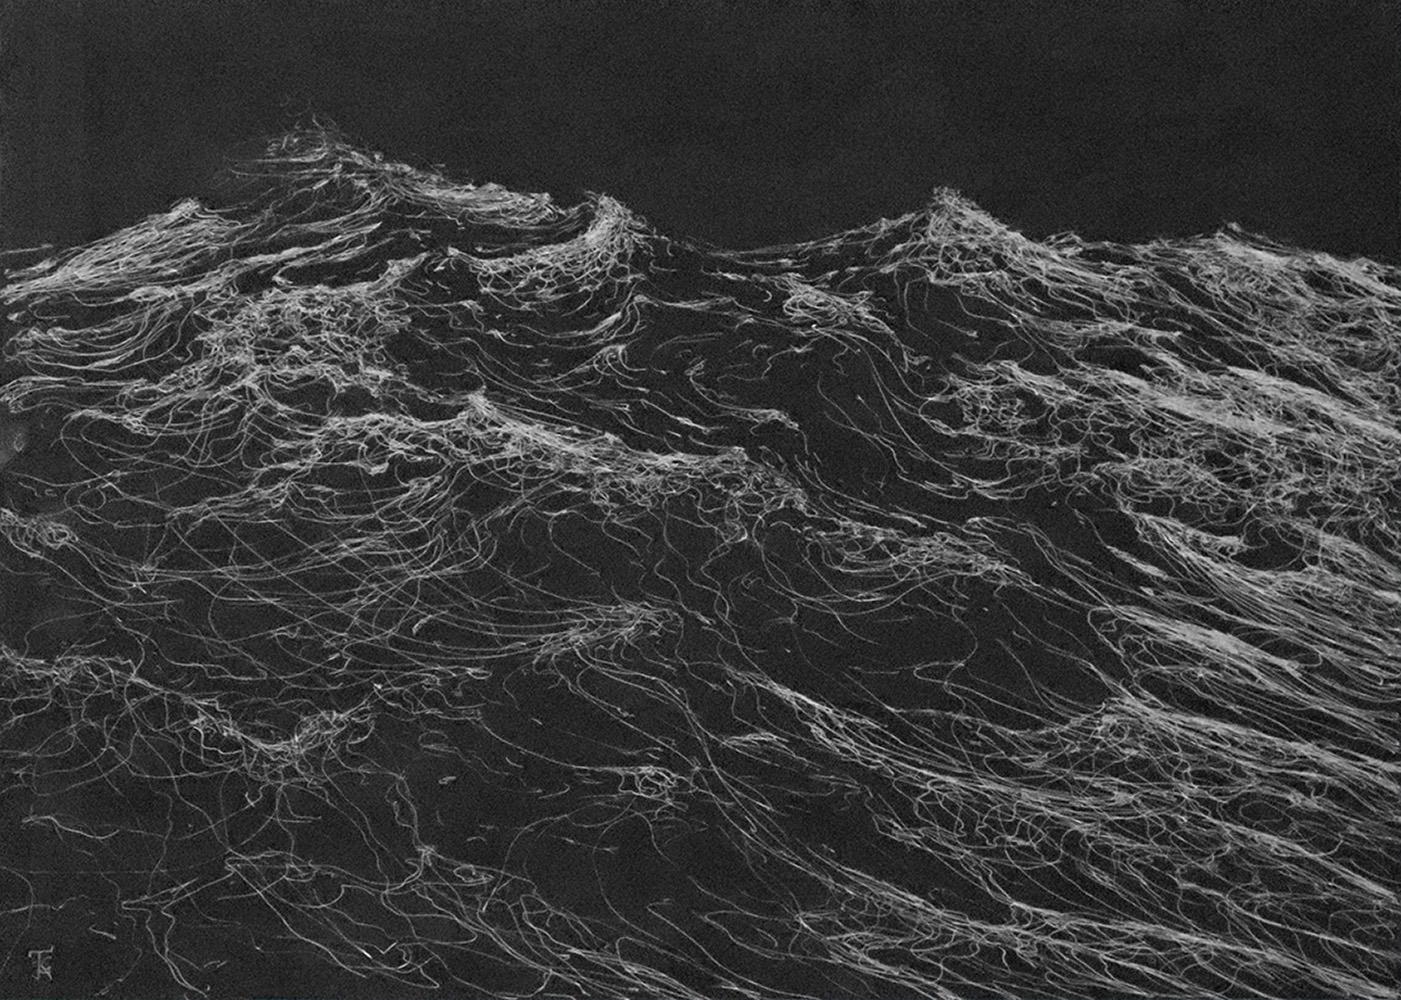 Dark Clamour by F. S. Borquez - Work on paper, contemporary, ocean waves - Painting by Franco Salas Borquez